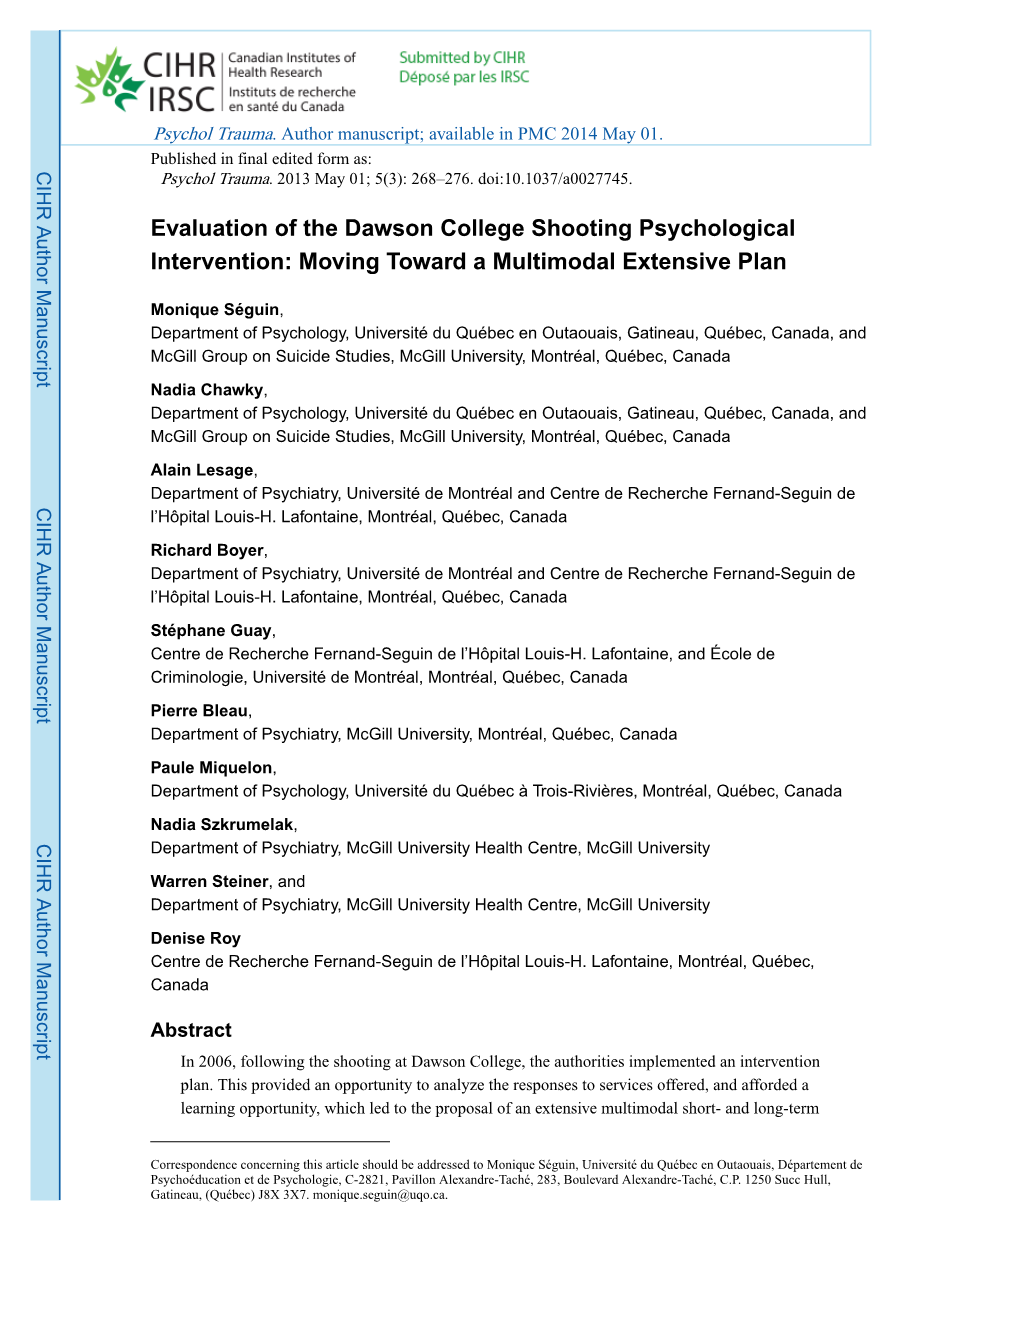 Evaluation of the Dawson College Shooting Psychological Intervention: Moving Toward a Multimodal Extensive Plan